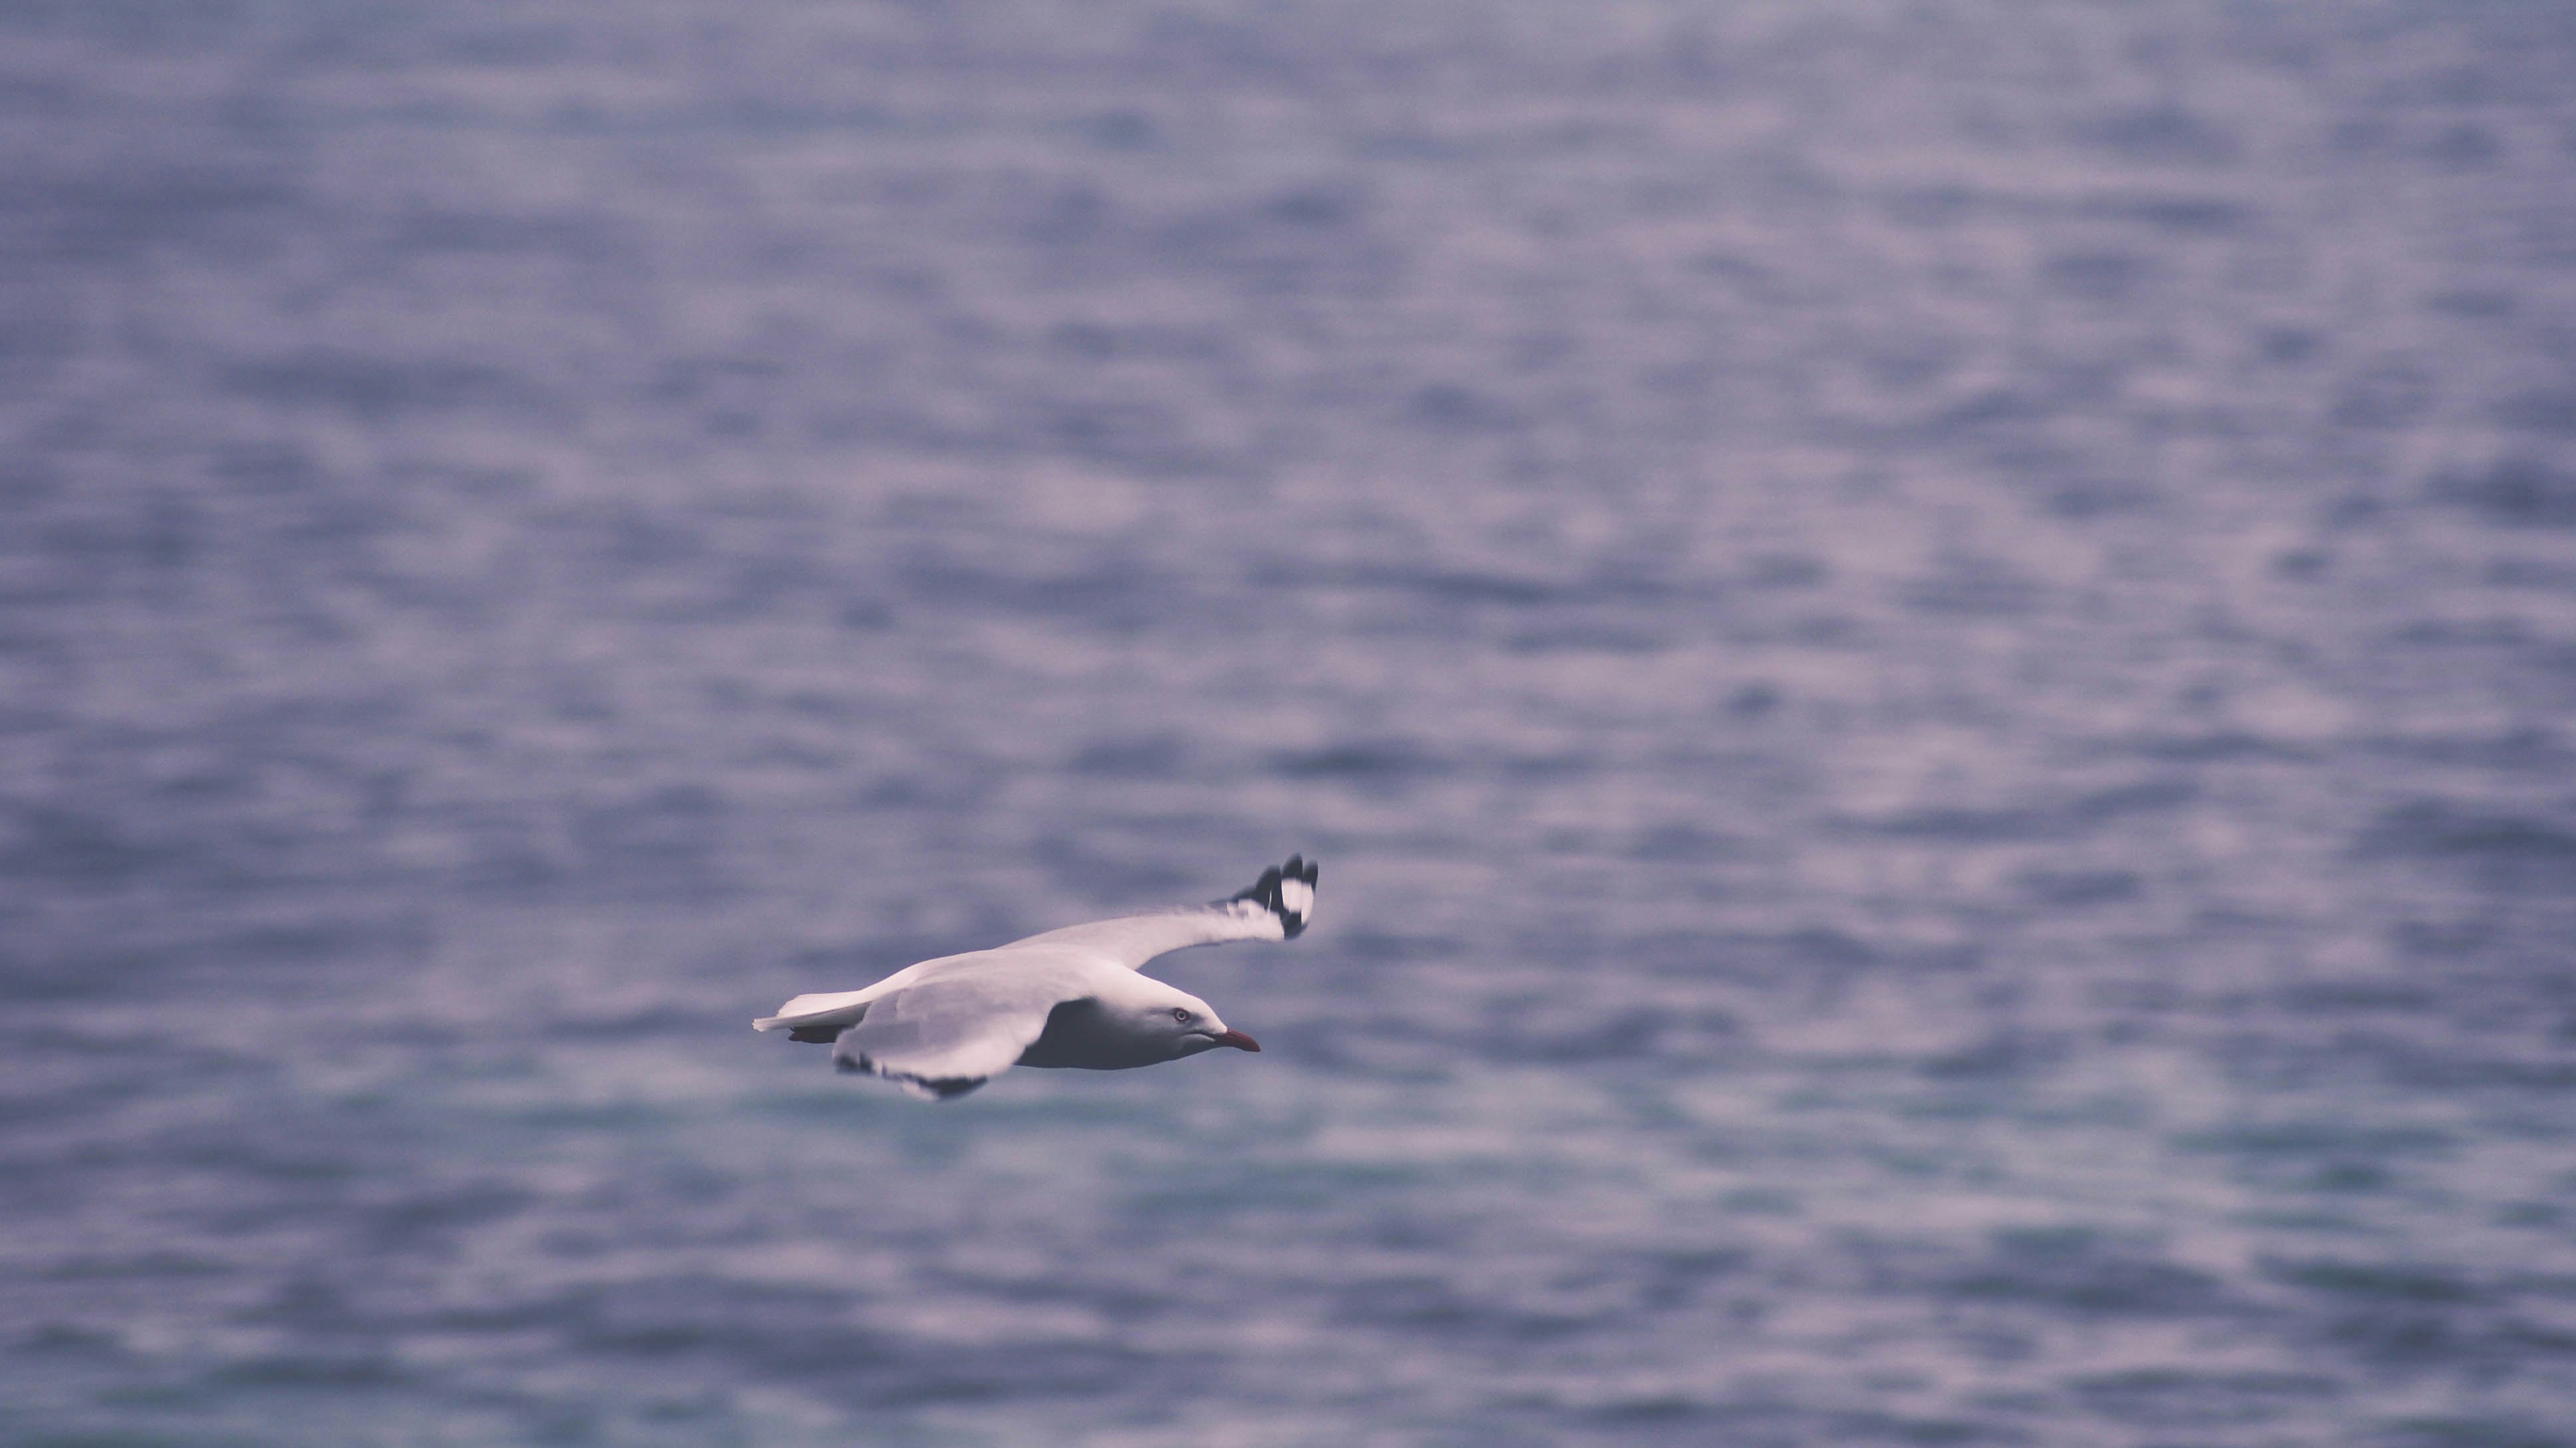 white seagull mid-flight above water duringday